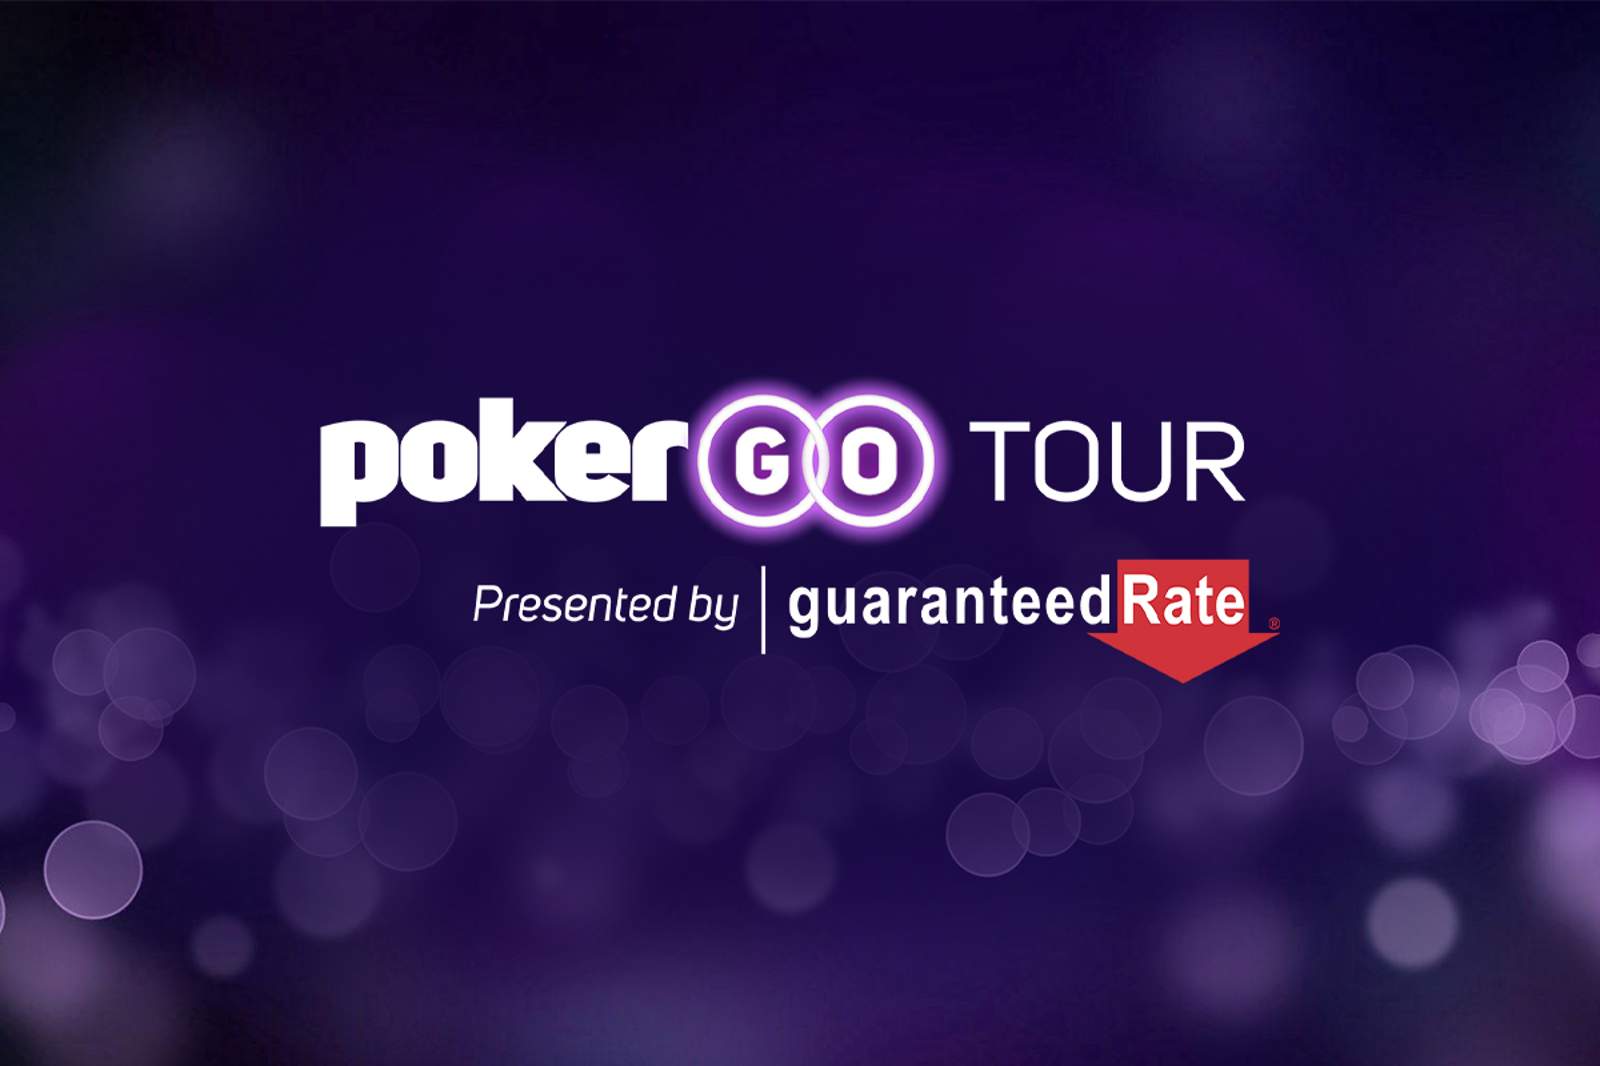 2021 PokerGO Tour® Presented By Guaranteed Rate Concludes In Grand Fashion With PokerGO Tour Championship In December